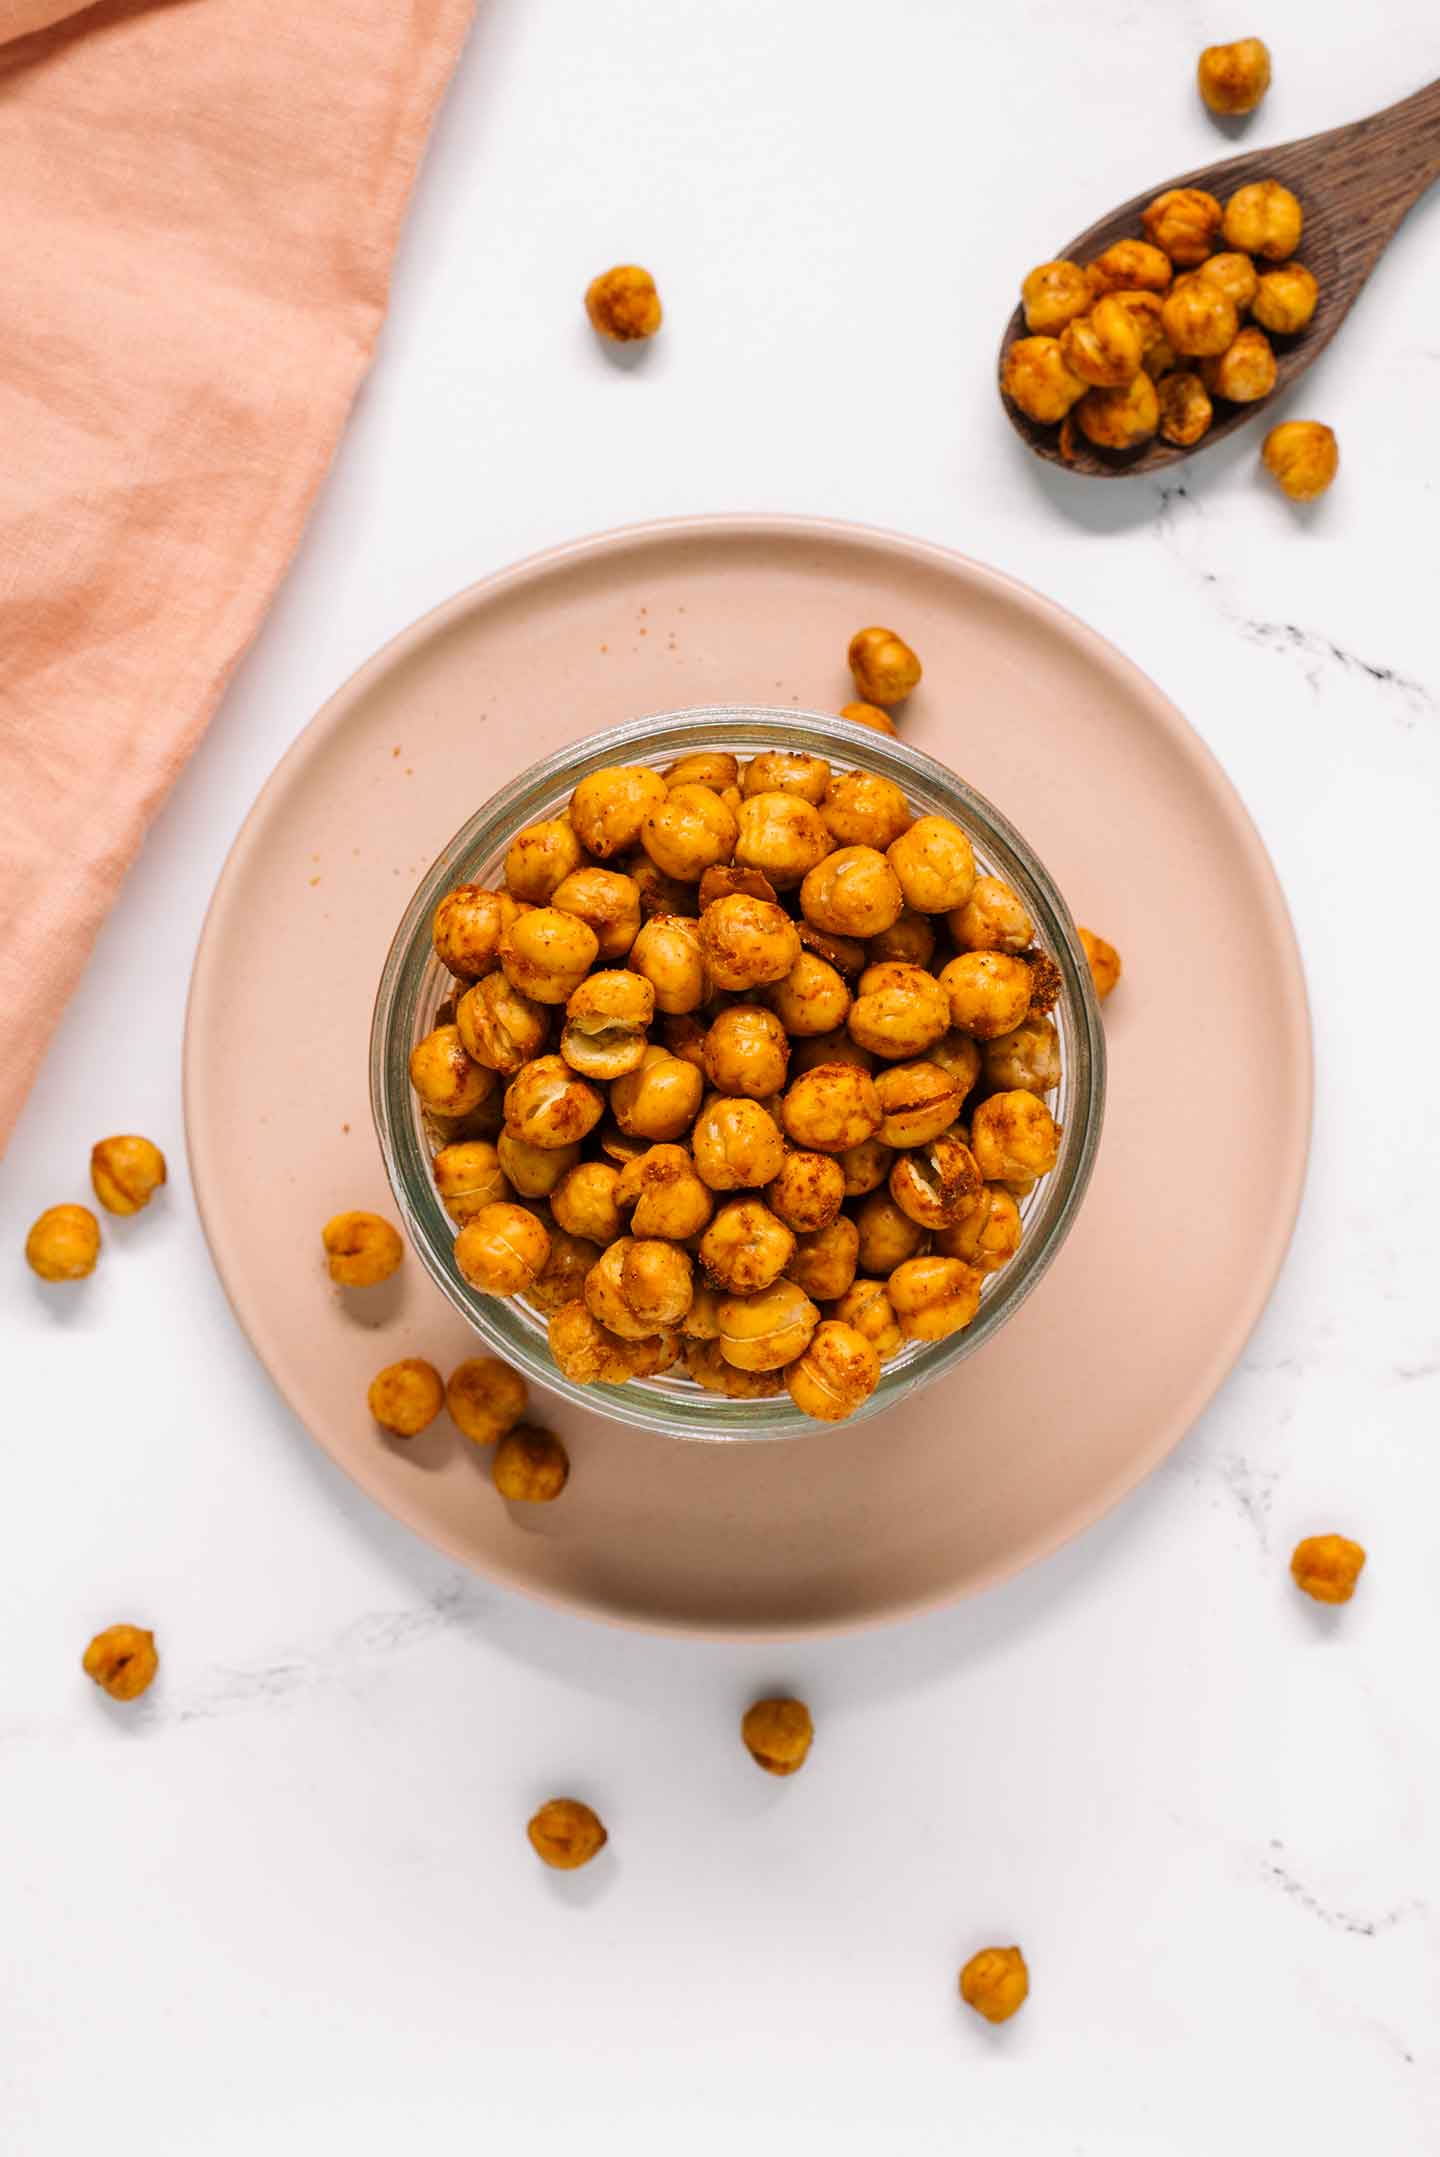 Top down view of lightly seasoned crunchy roasted chickpeas in a small bowl. A spoon rests nearby with crunchy chickpeas spilling from it.